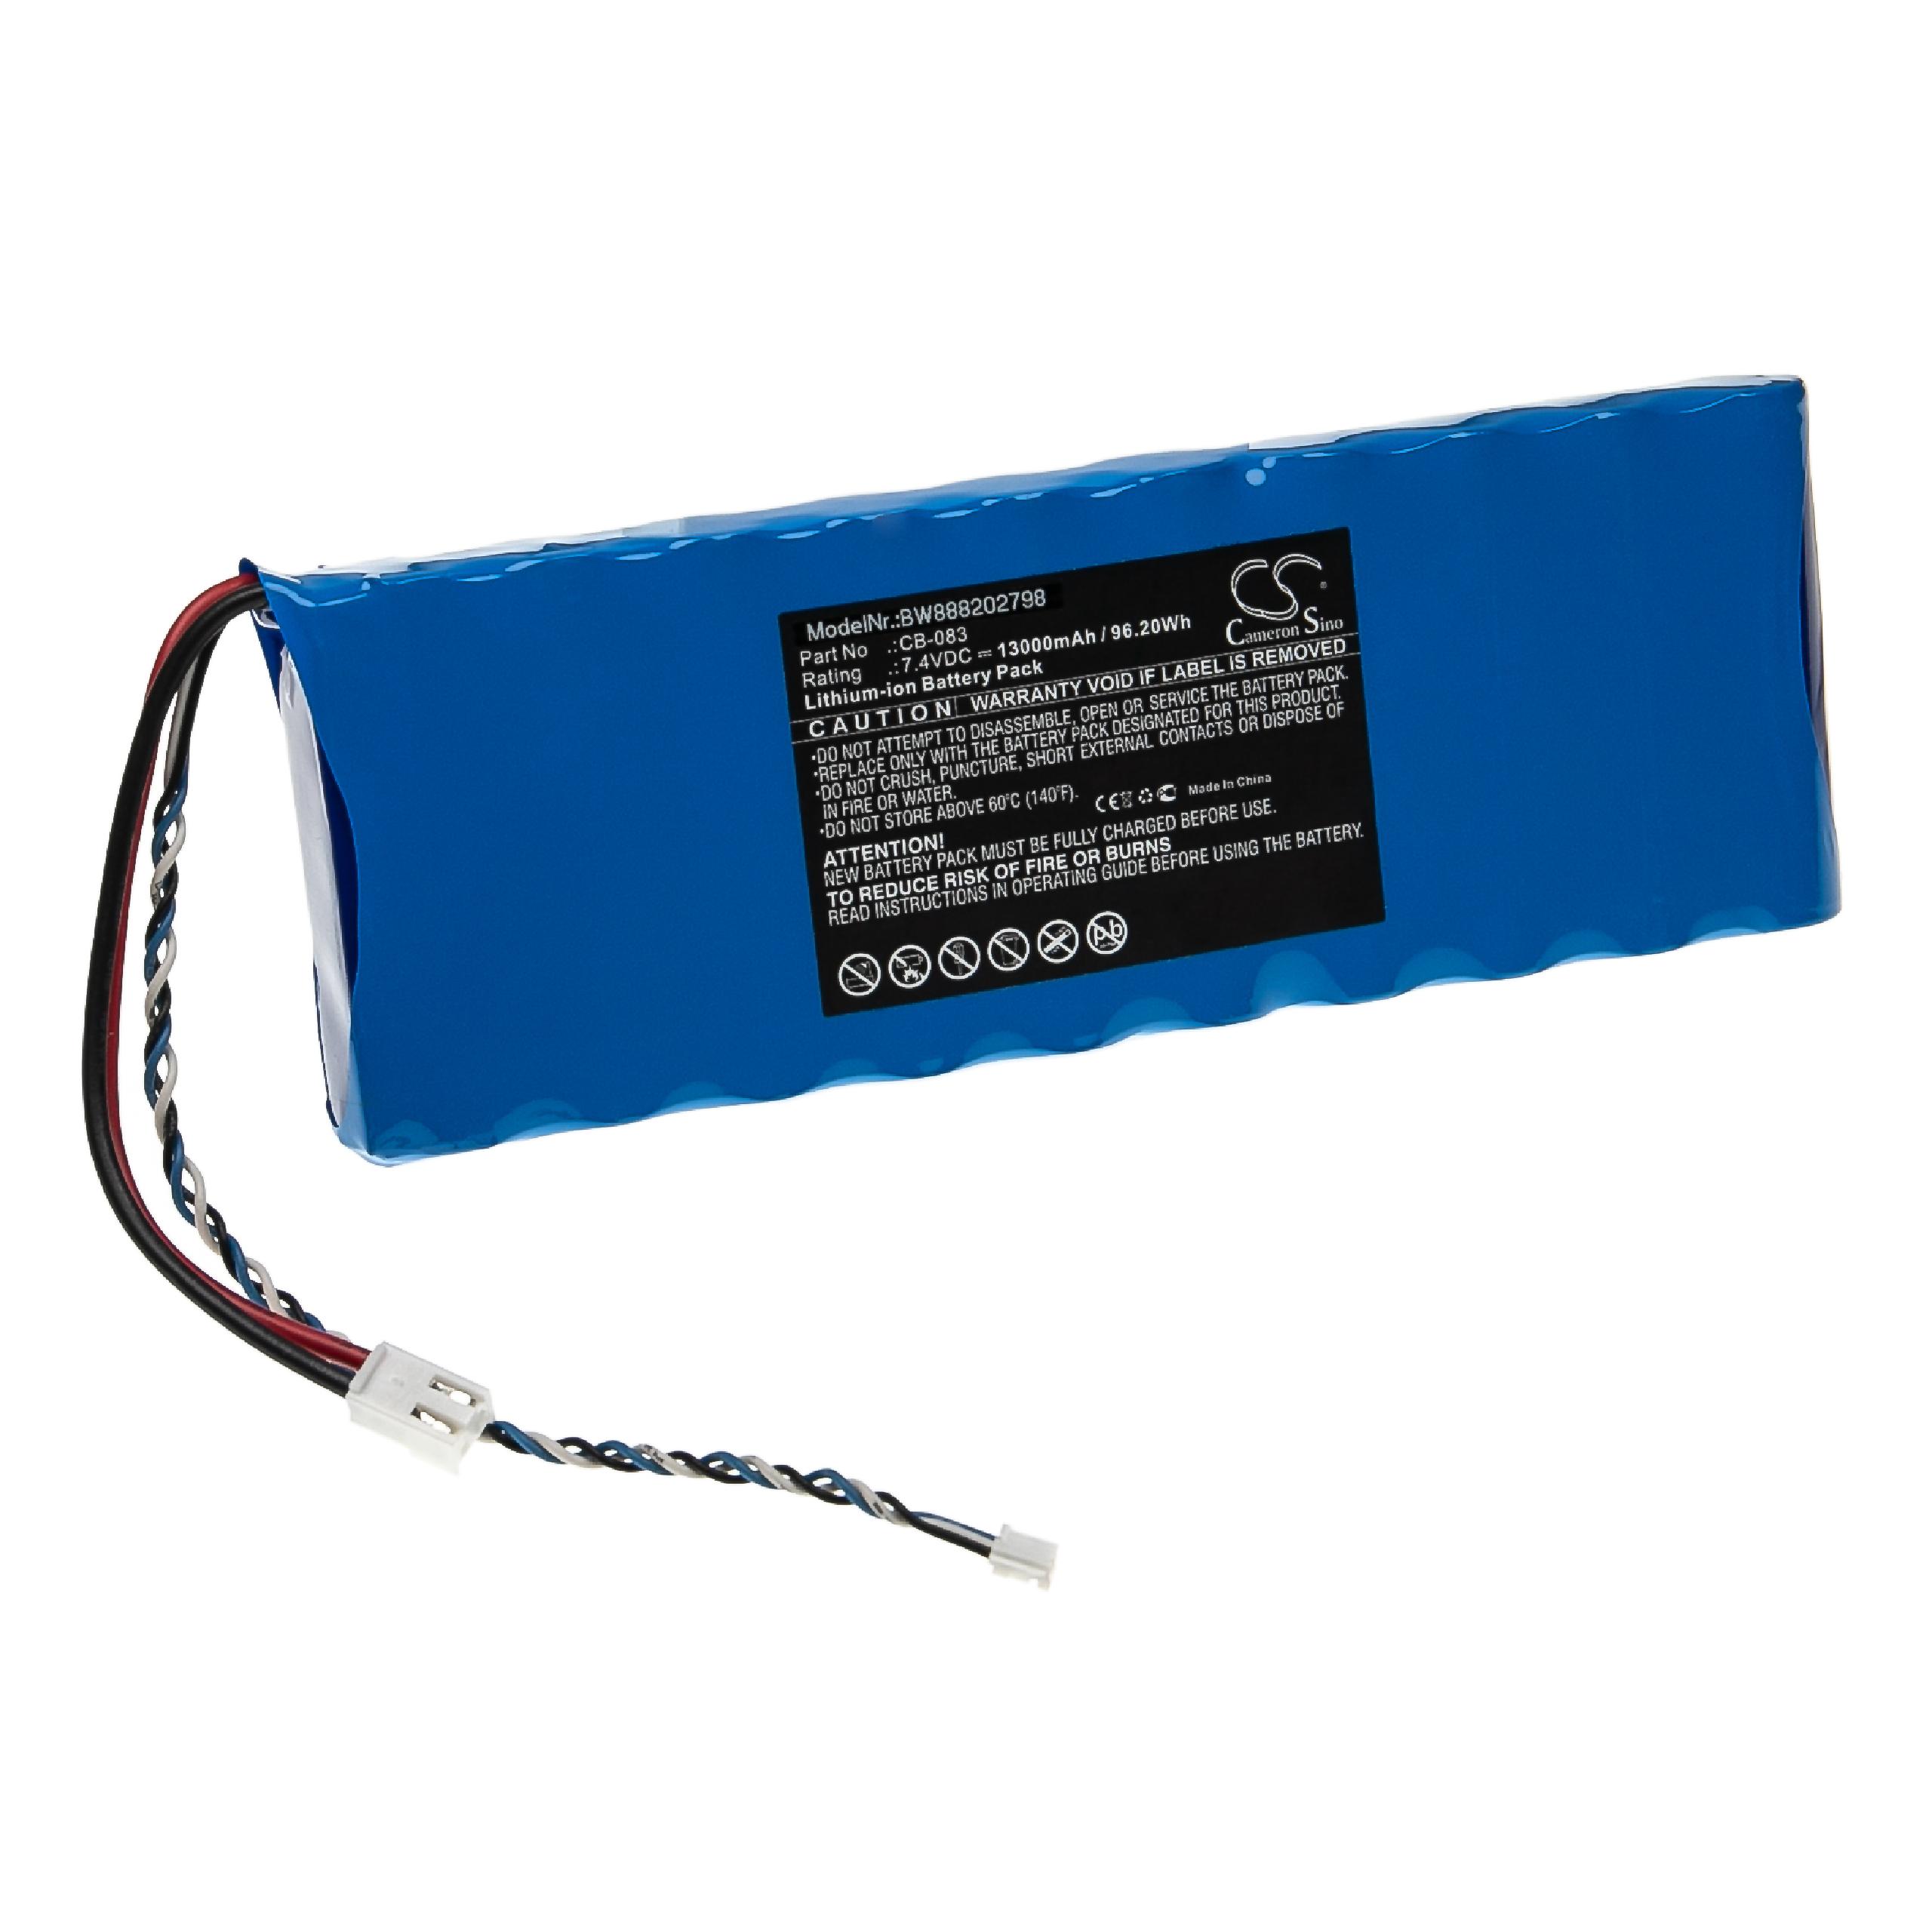 Laser Battery Replacement for Promax CB-083 - 13000mAh 7.4V Li-Ion